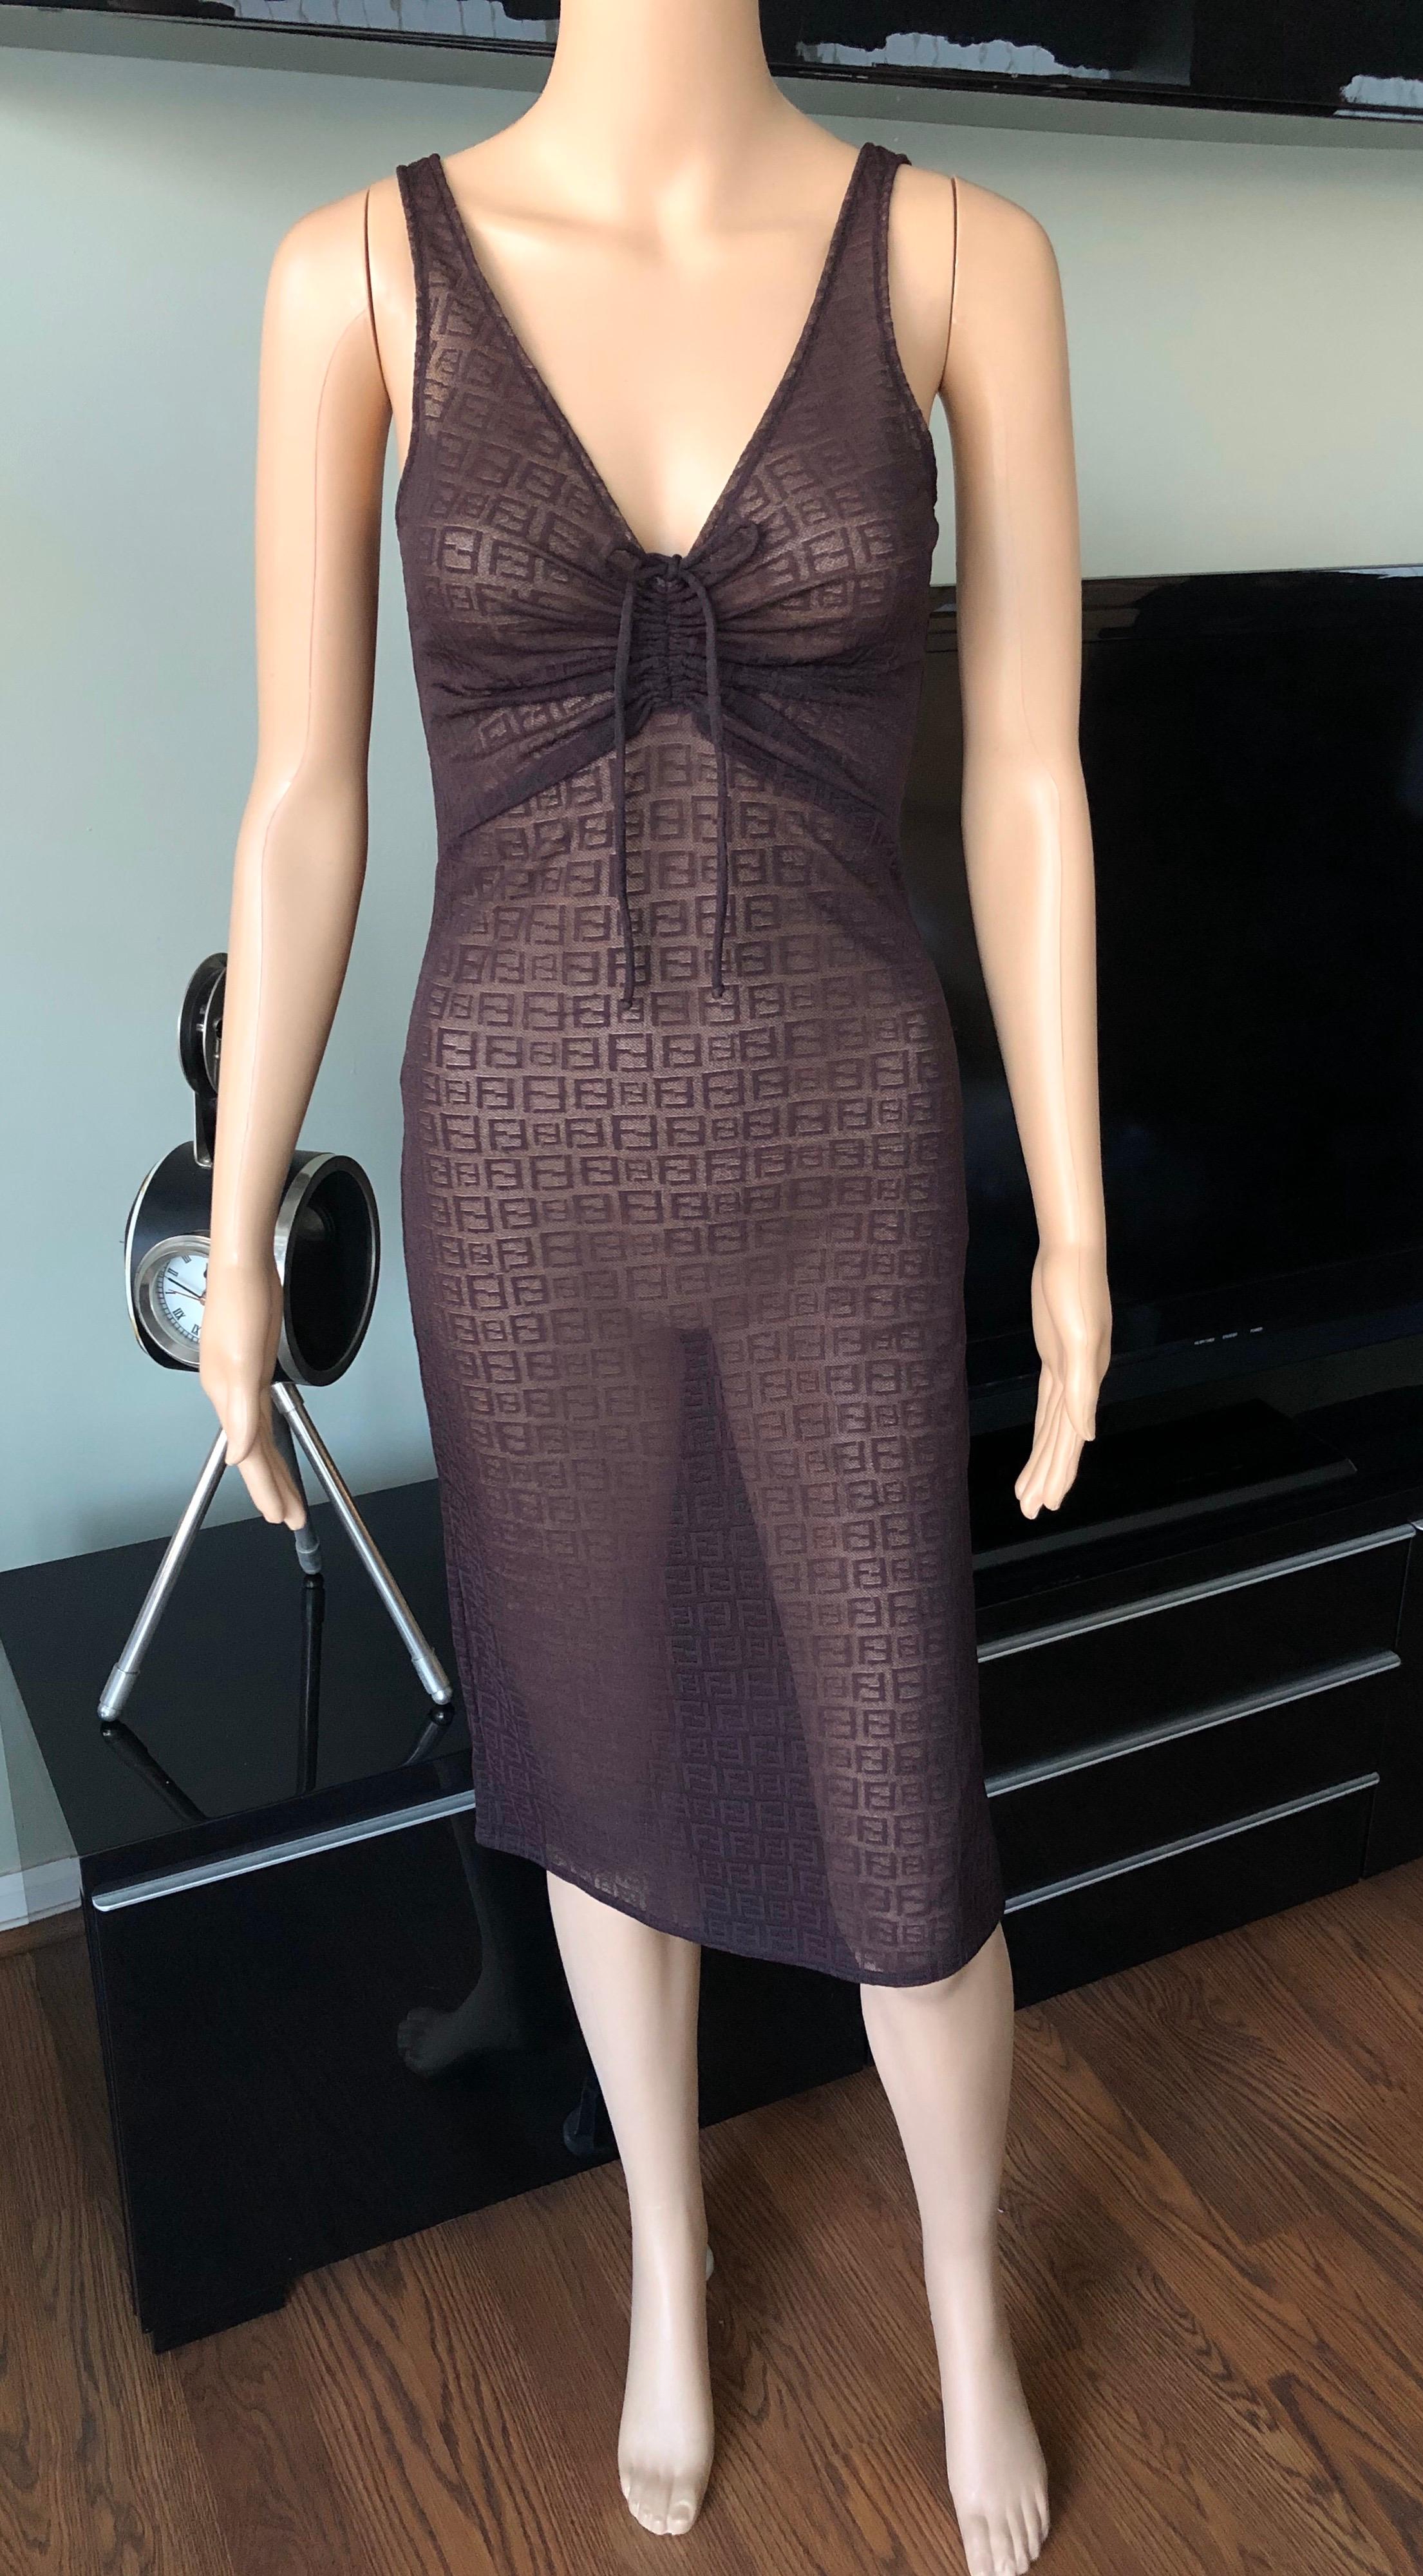 Fendi 1990's Vintage Zucca Monogram Sheer Mesh Knit Brown Dress IT 40

Excellent Condition

Please see the approximate measurements below: 
Chest: 30-38